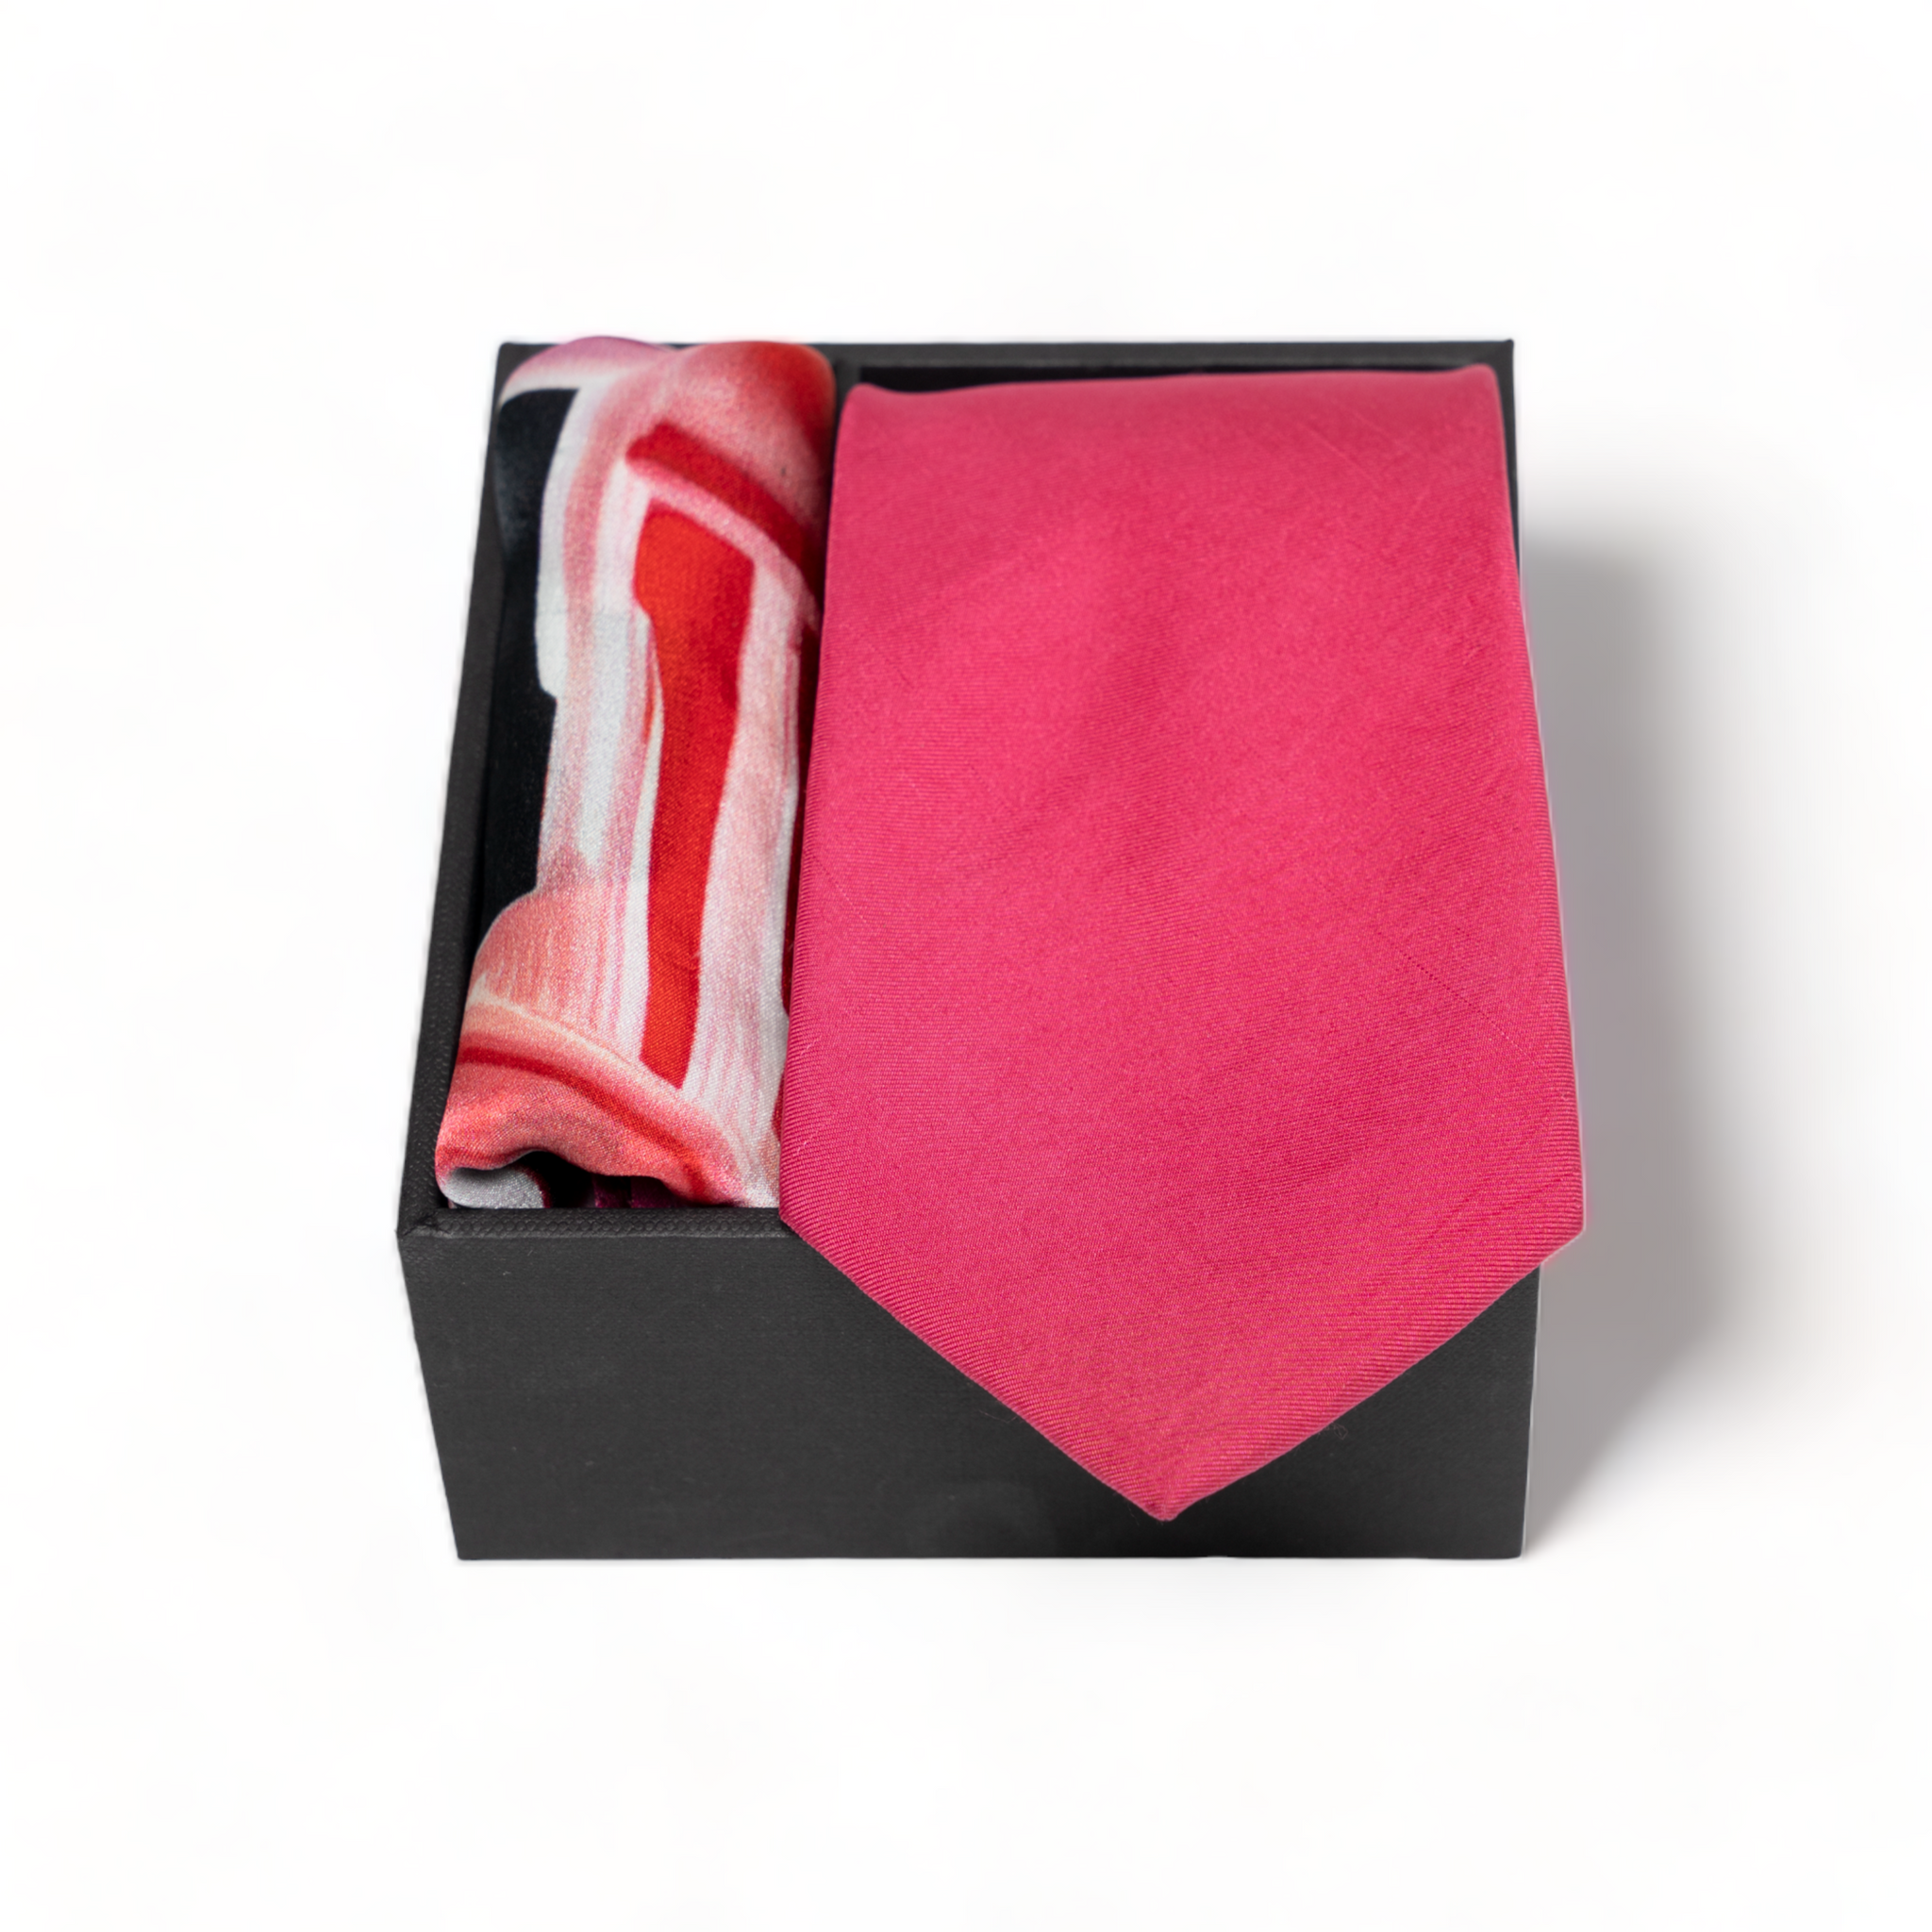 Chokore Special 2-in-1 Gift Set for Him (Solid Pink Necktie & Jaipur Pocket Square)